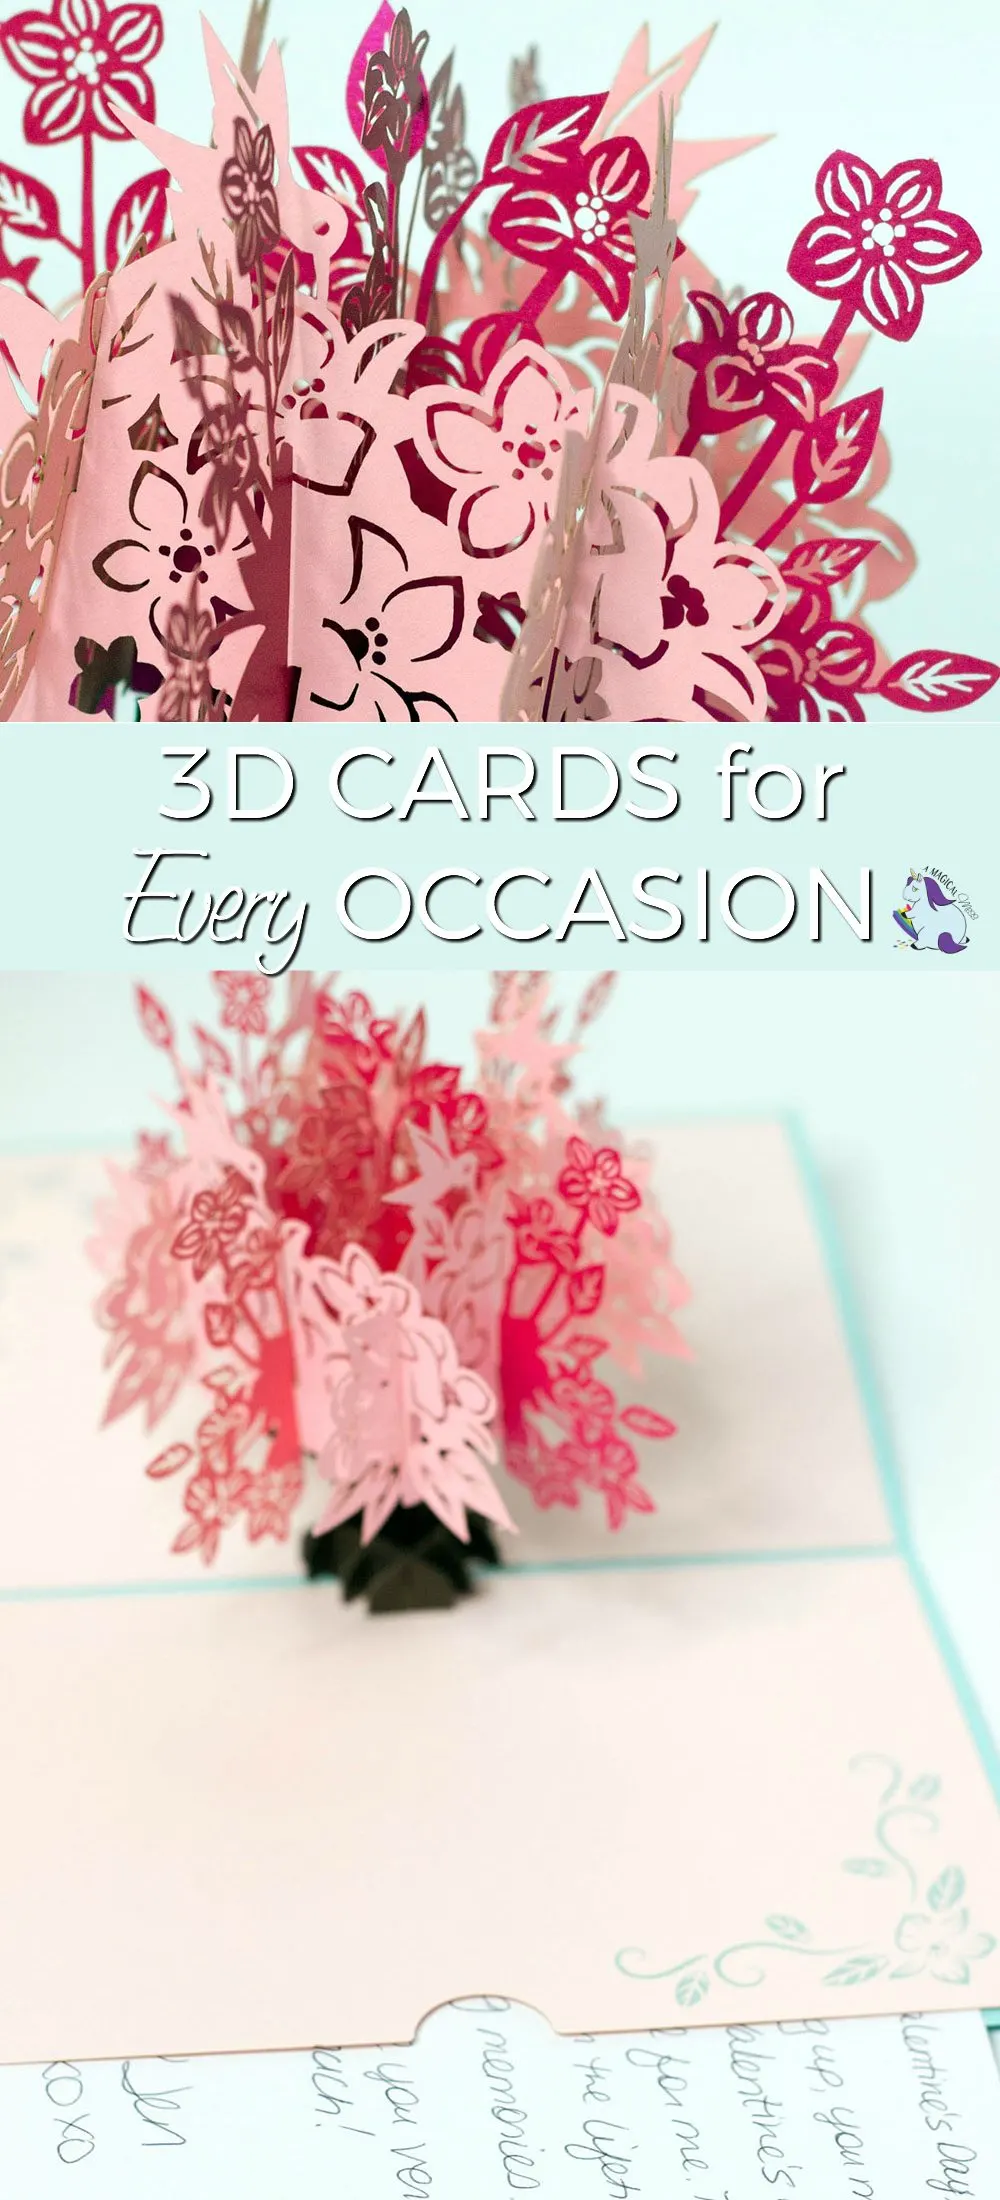 Smile-Inducing 3D Cards for Every Occasion